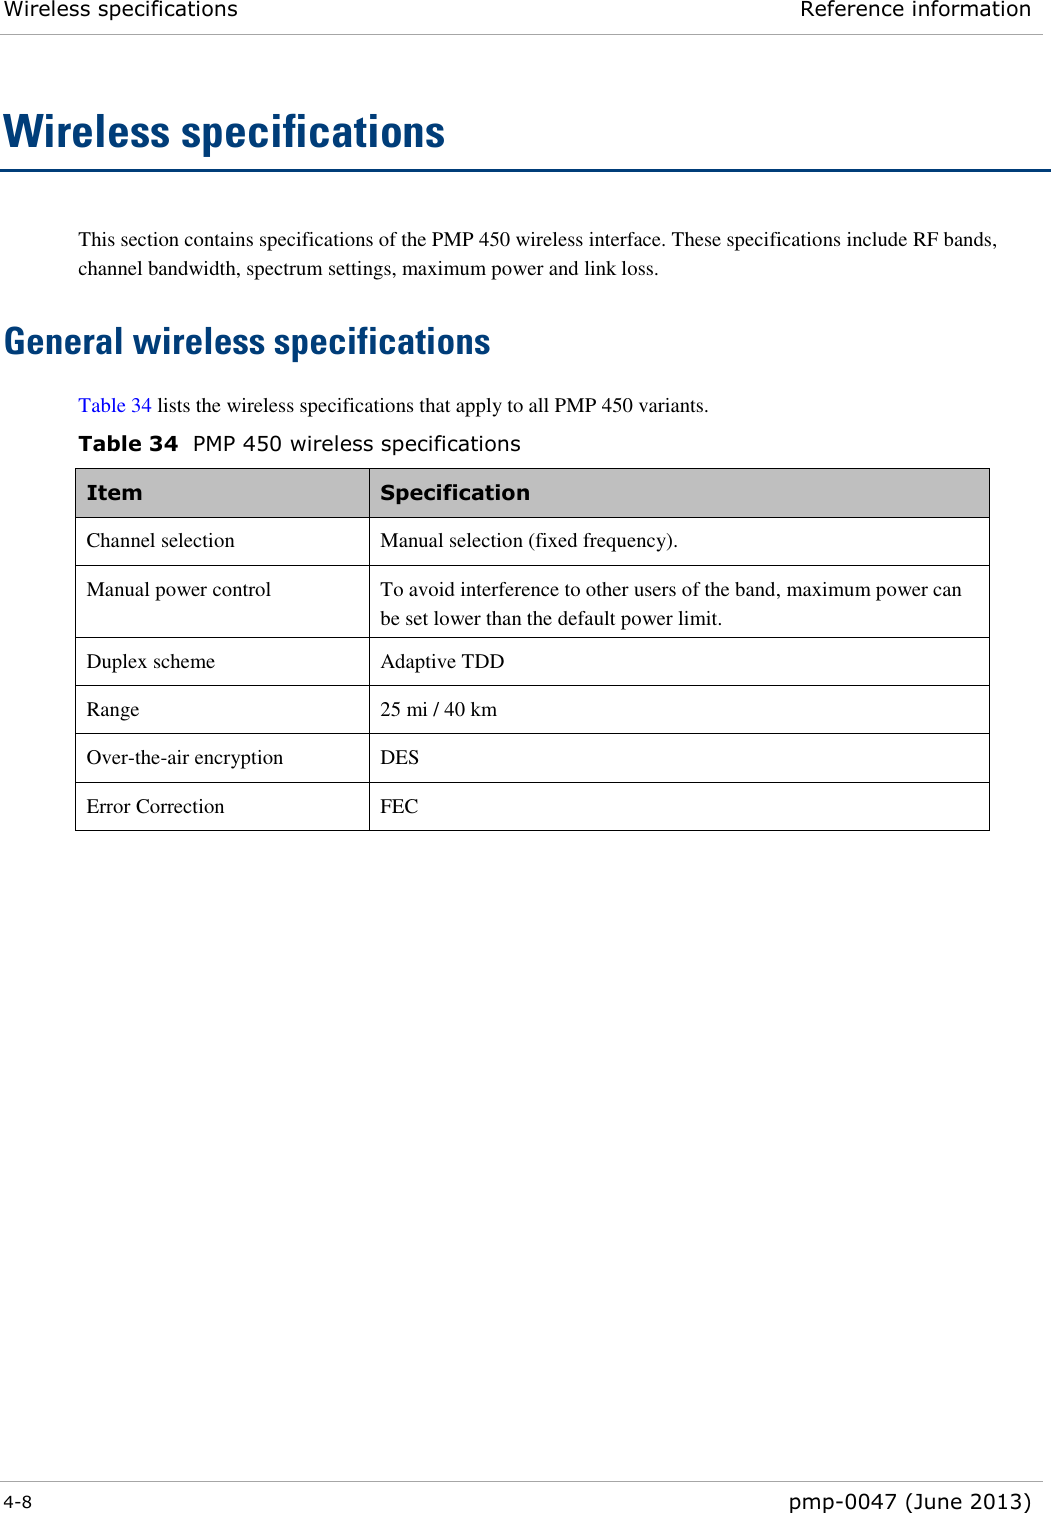 Wireless specifications Reference information  4-8  pmp-0047 (June 2013)  Wireless specifications This section contains specifications of the PMP 450 wireless interface. These specifications include RF bands, channel bandwidth, spectrum settings, maximum power and link loss. General wireless specifications Table 34 lists the wireless specifications that apply to all PMP 450 variants.  Table 34  PMP 450 wireless specifications Item  Specification  Channel selection Manual selection (fixed frequency). Manual power control  To avoid interference to other users of the band, maximum power can be set lower than the default power limit. Duplex scheme Adaptive TDD Range 25 mi / 40 km Over-the-air encryption DES Error Correction FEC           